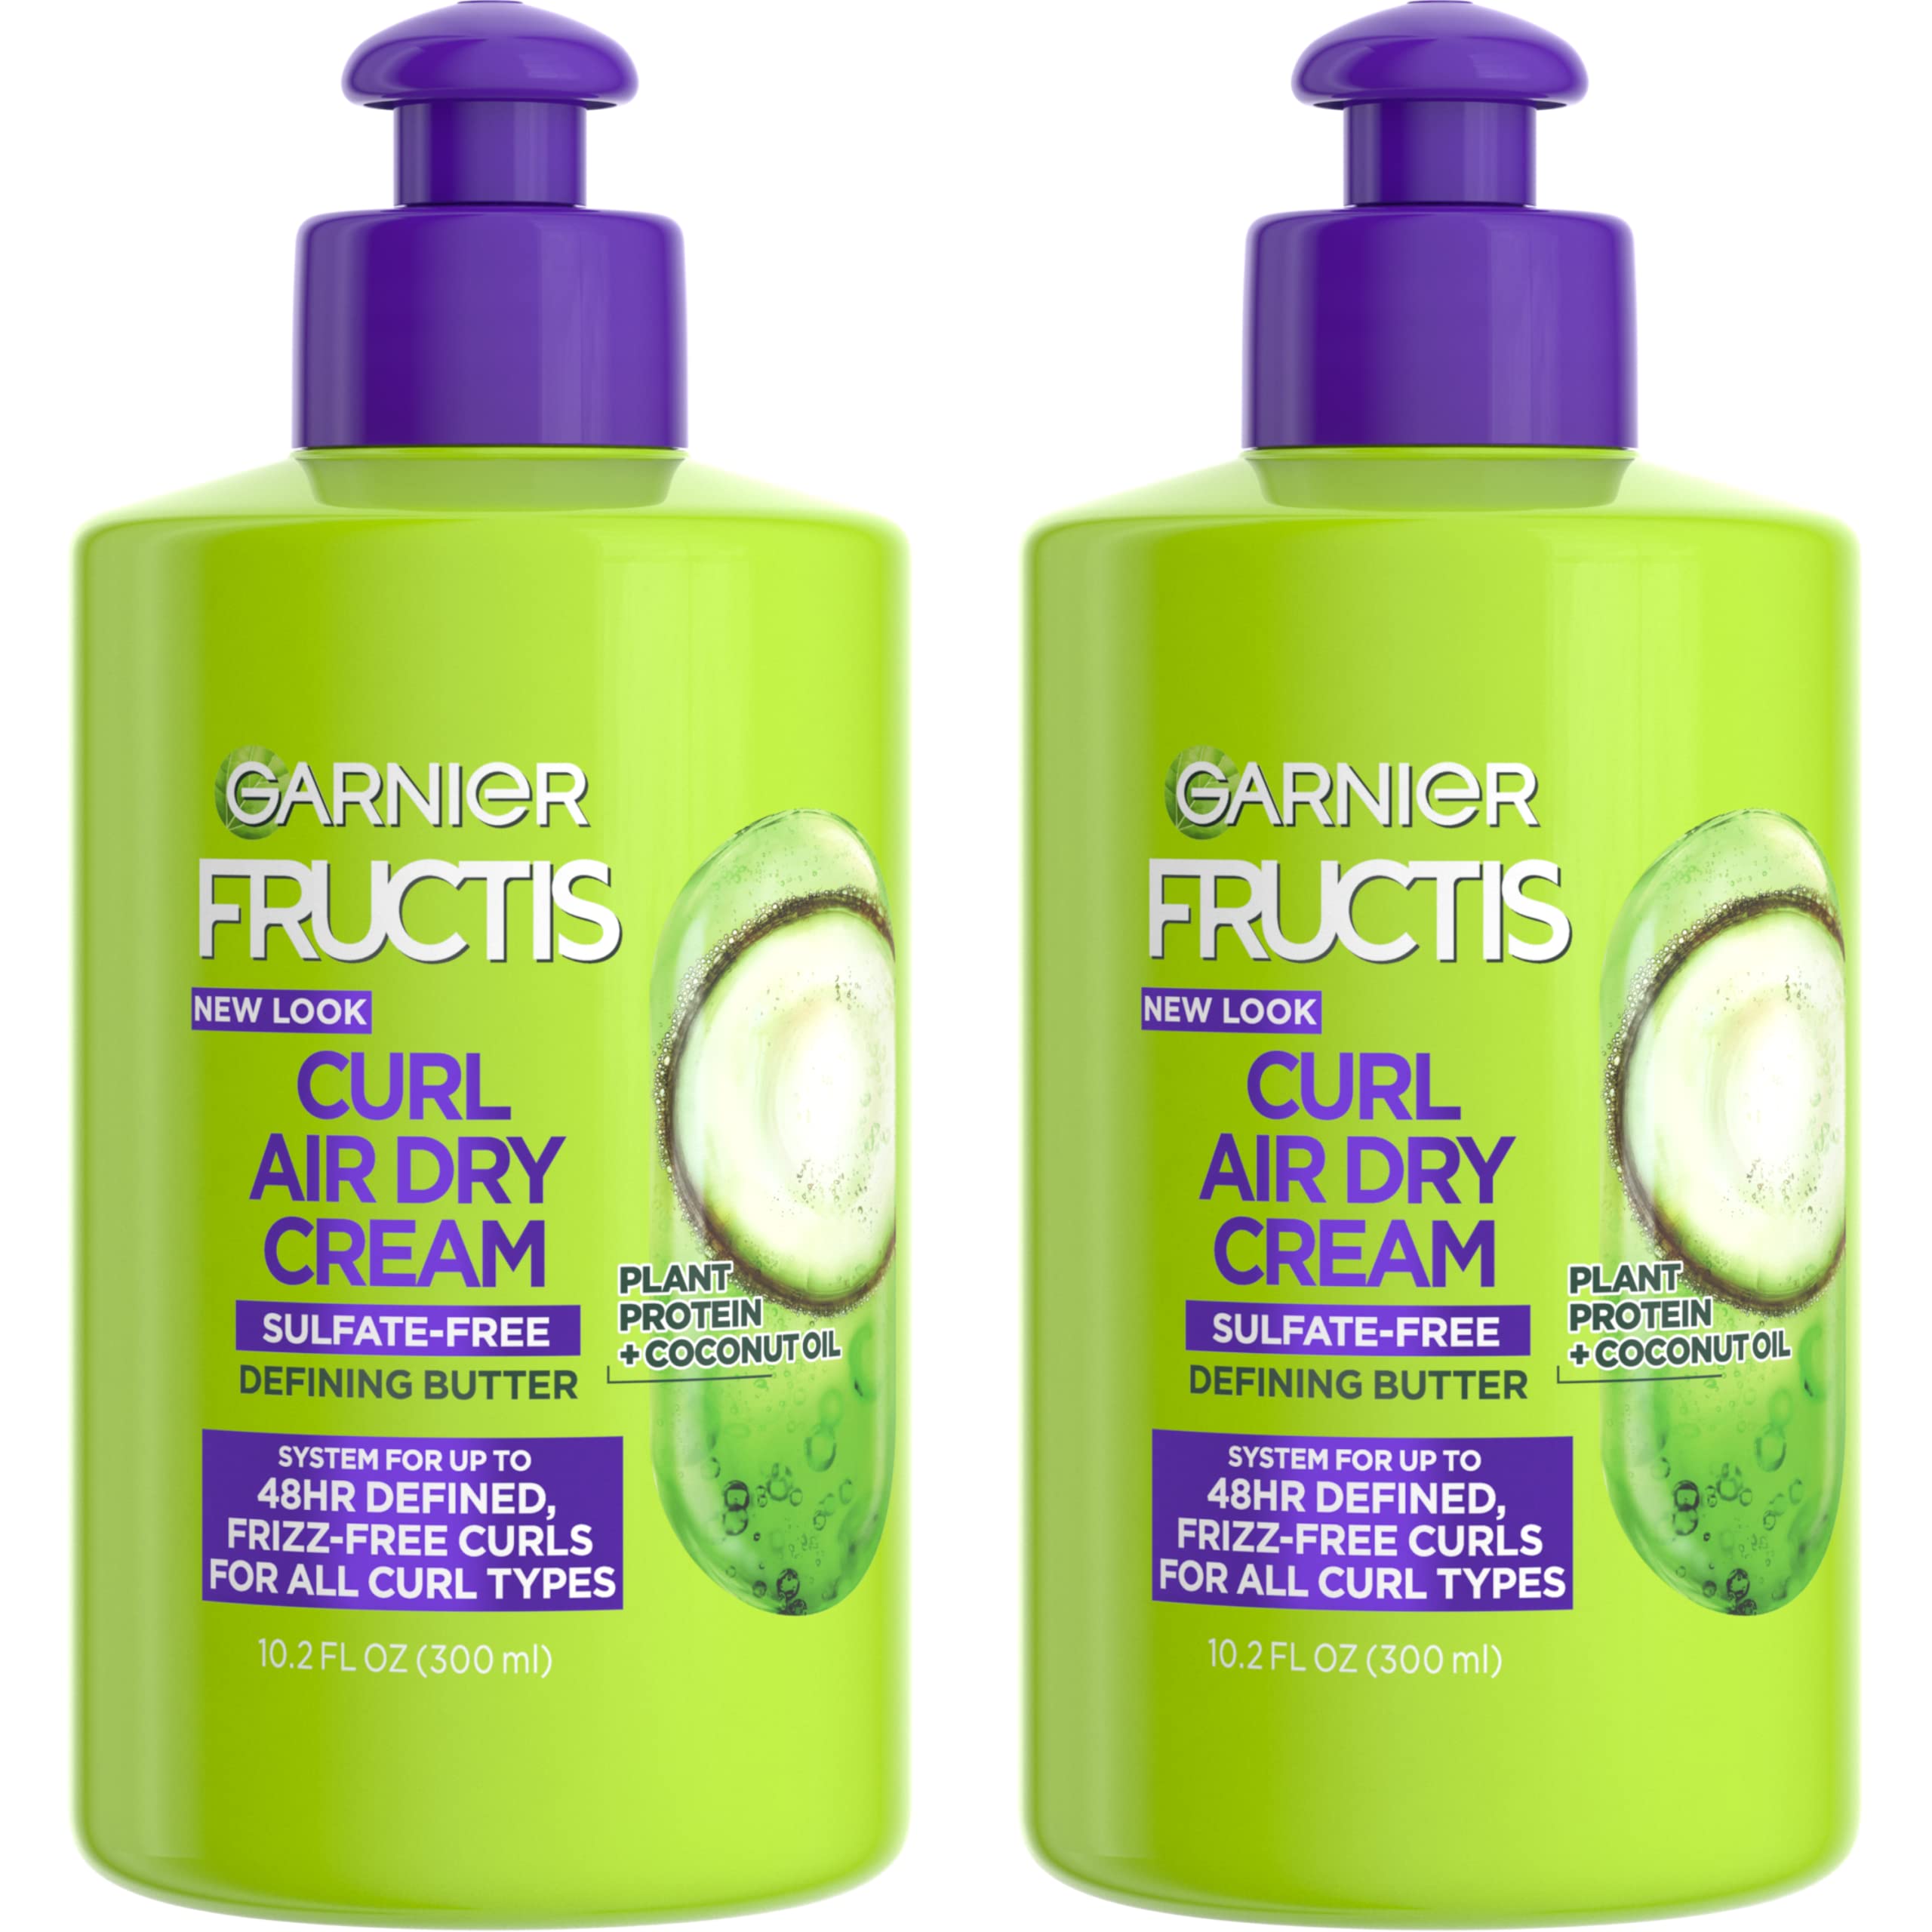 Garnier Hair Care Fructis Triple Nutrition Curl Nourish Butter Cream Leave-In Conditioner, 10.2 Fl Oz, Pack of 2